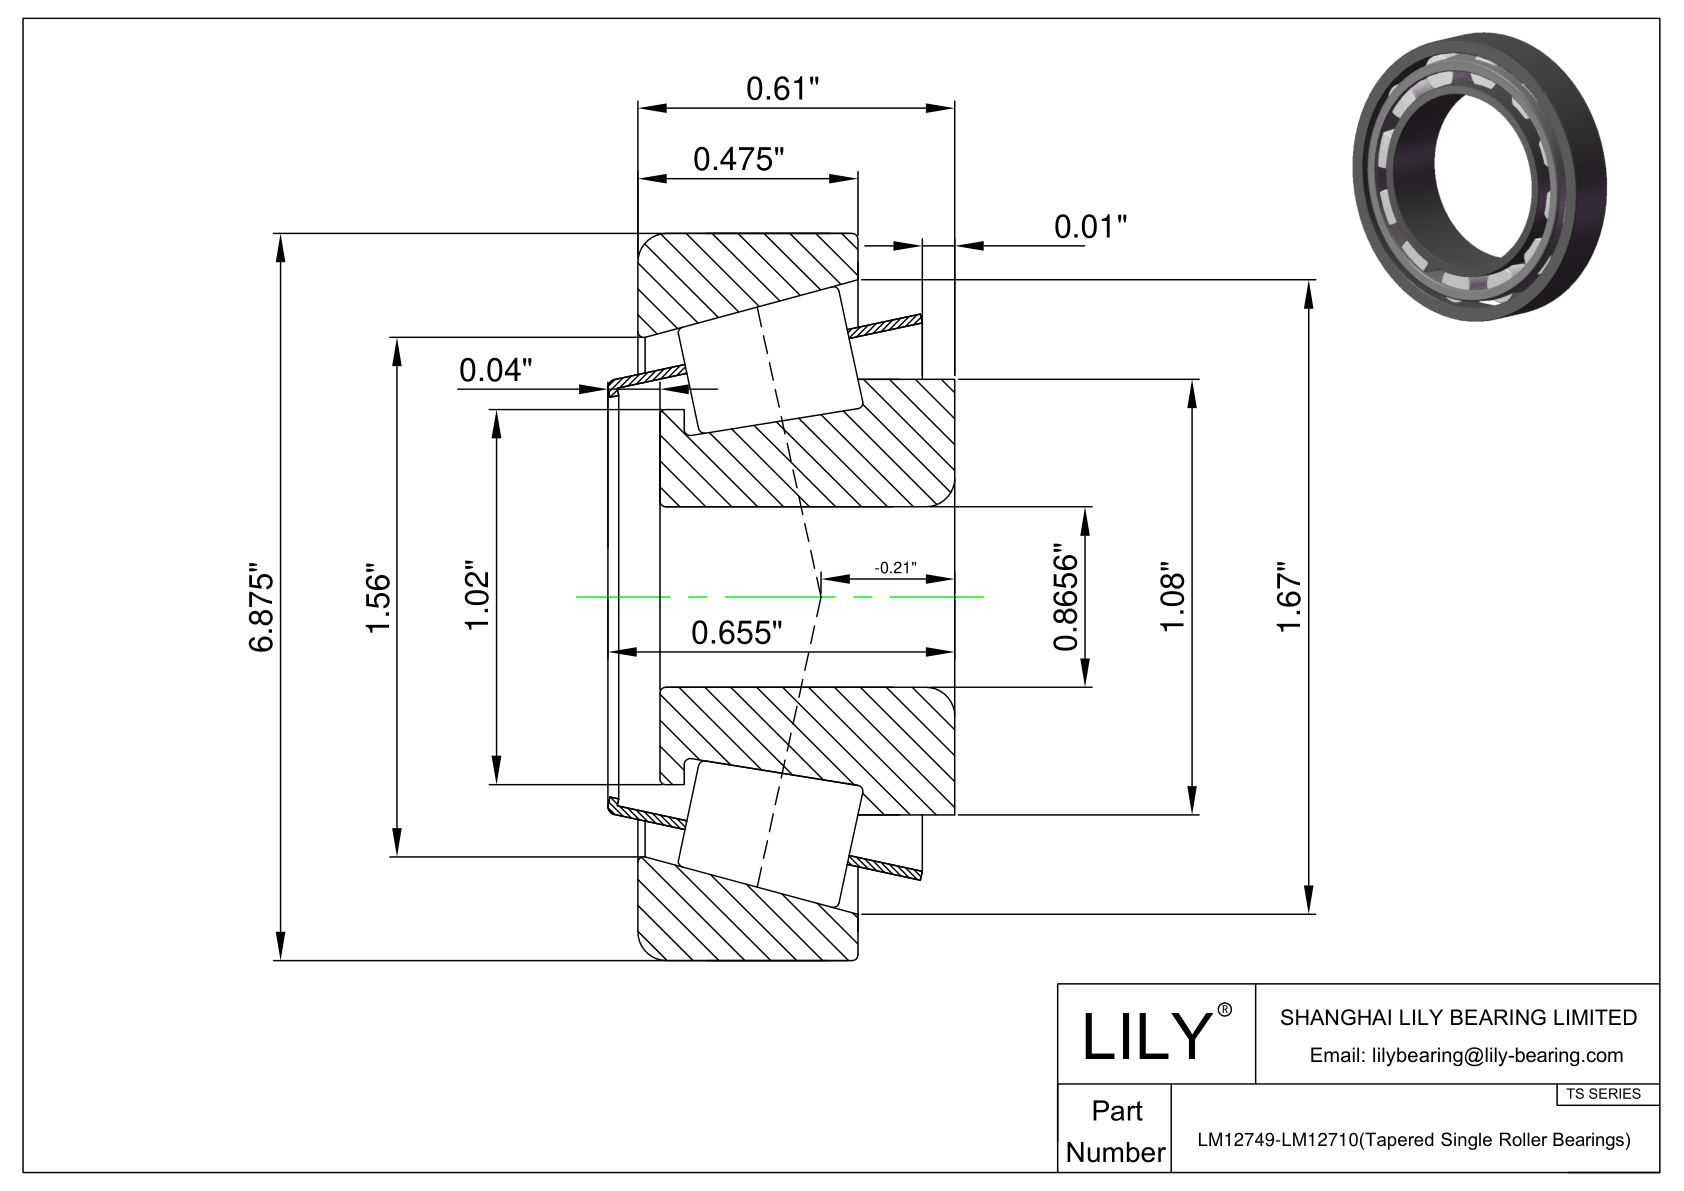 LM12749-LM12710 TS (Tapered Single Roller Bearings) (Imperial) cad drawing